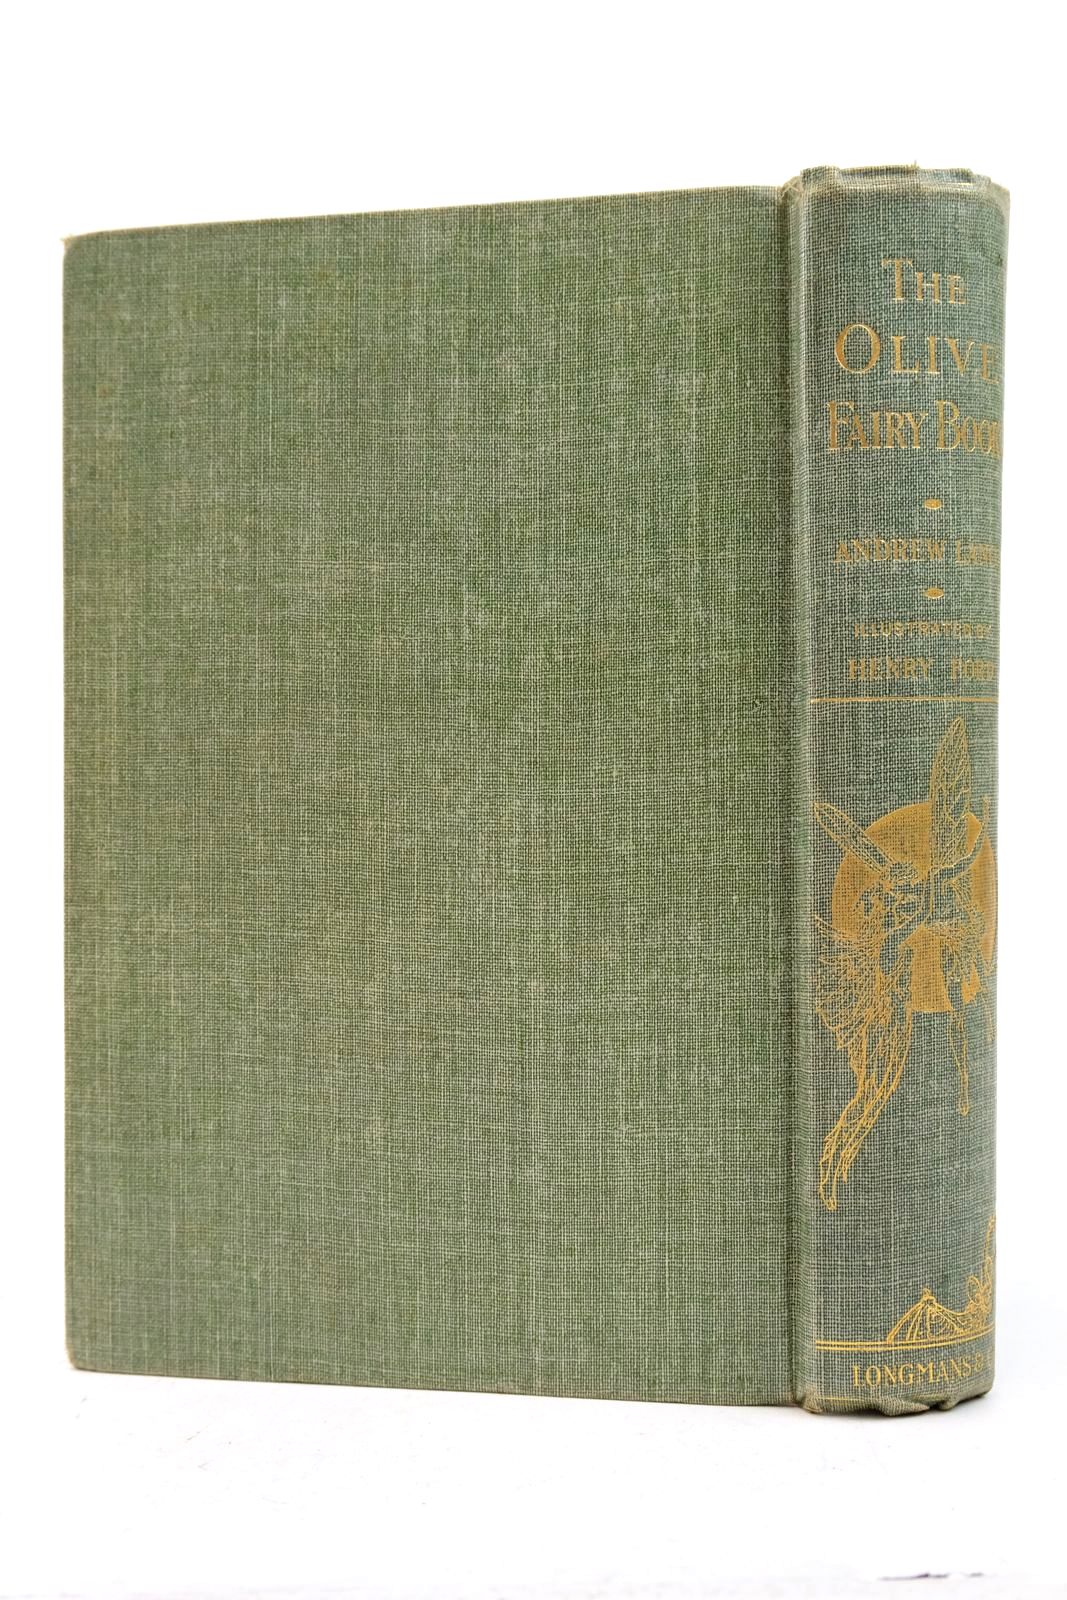 Photo of THE OLIVE FAIRY BOOK written by Lang, Andrew illustrated by Ford, H.J. published by Longmans, Green & Co. (STOCK CODE: 2139752)  for sale by Stella & Rose's Books